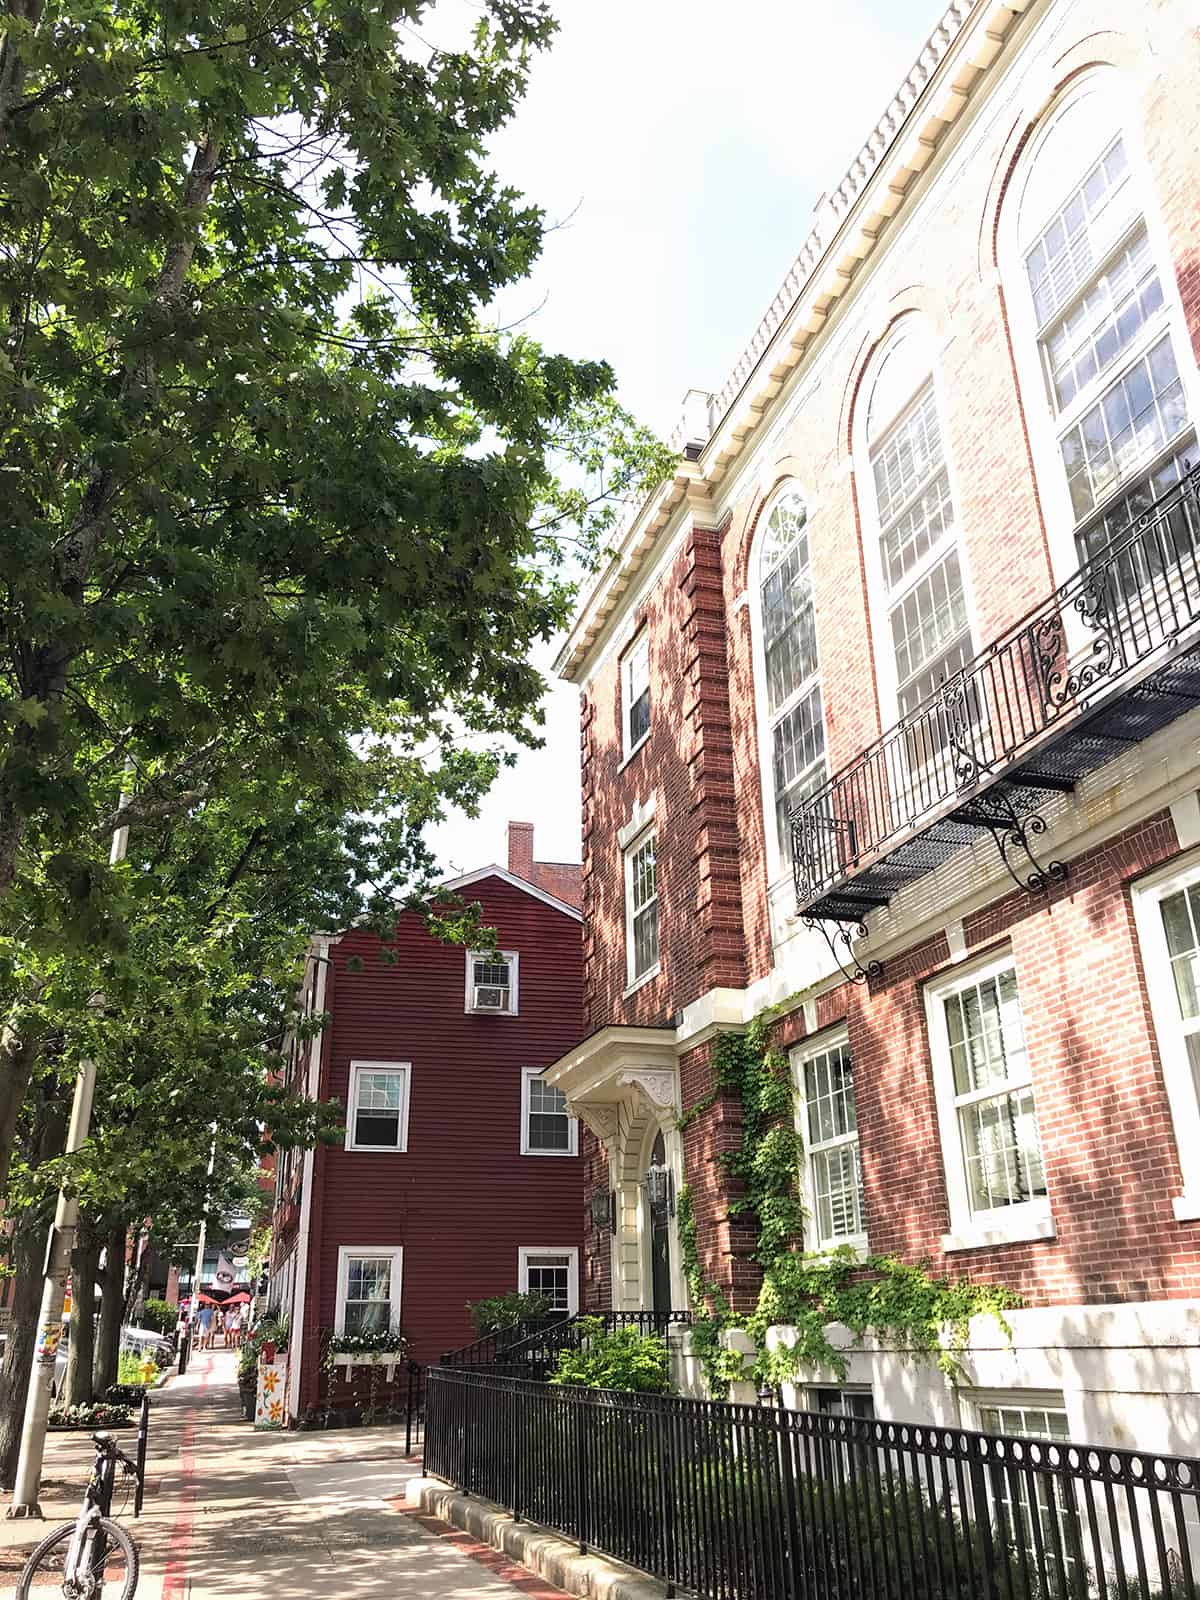 The beautiful cobblestone streets and brick buildings along a street in Salem, Massachusetts